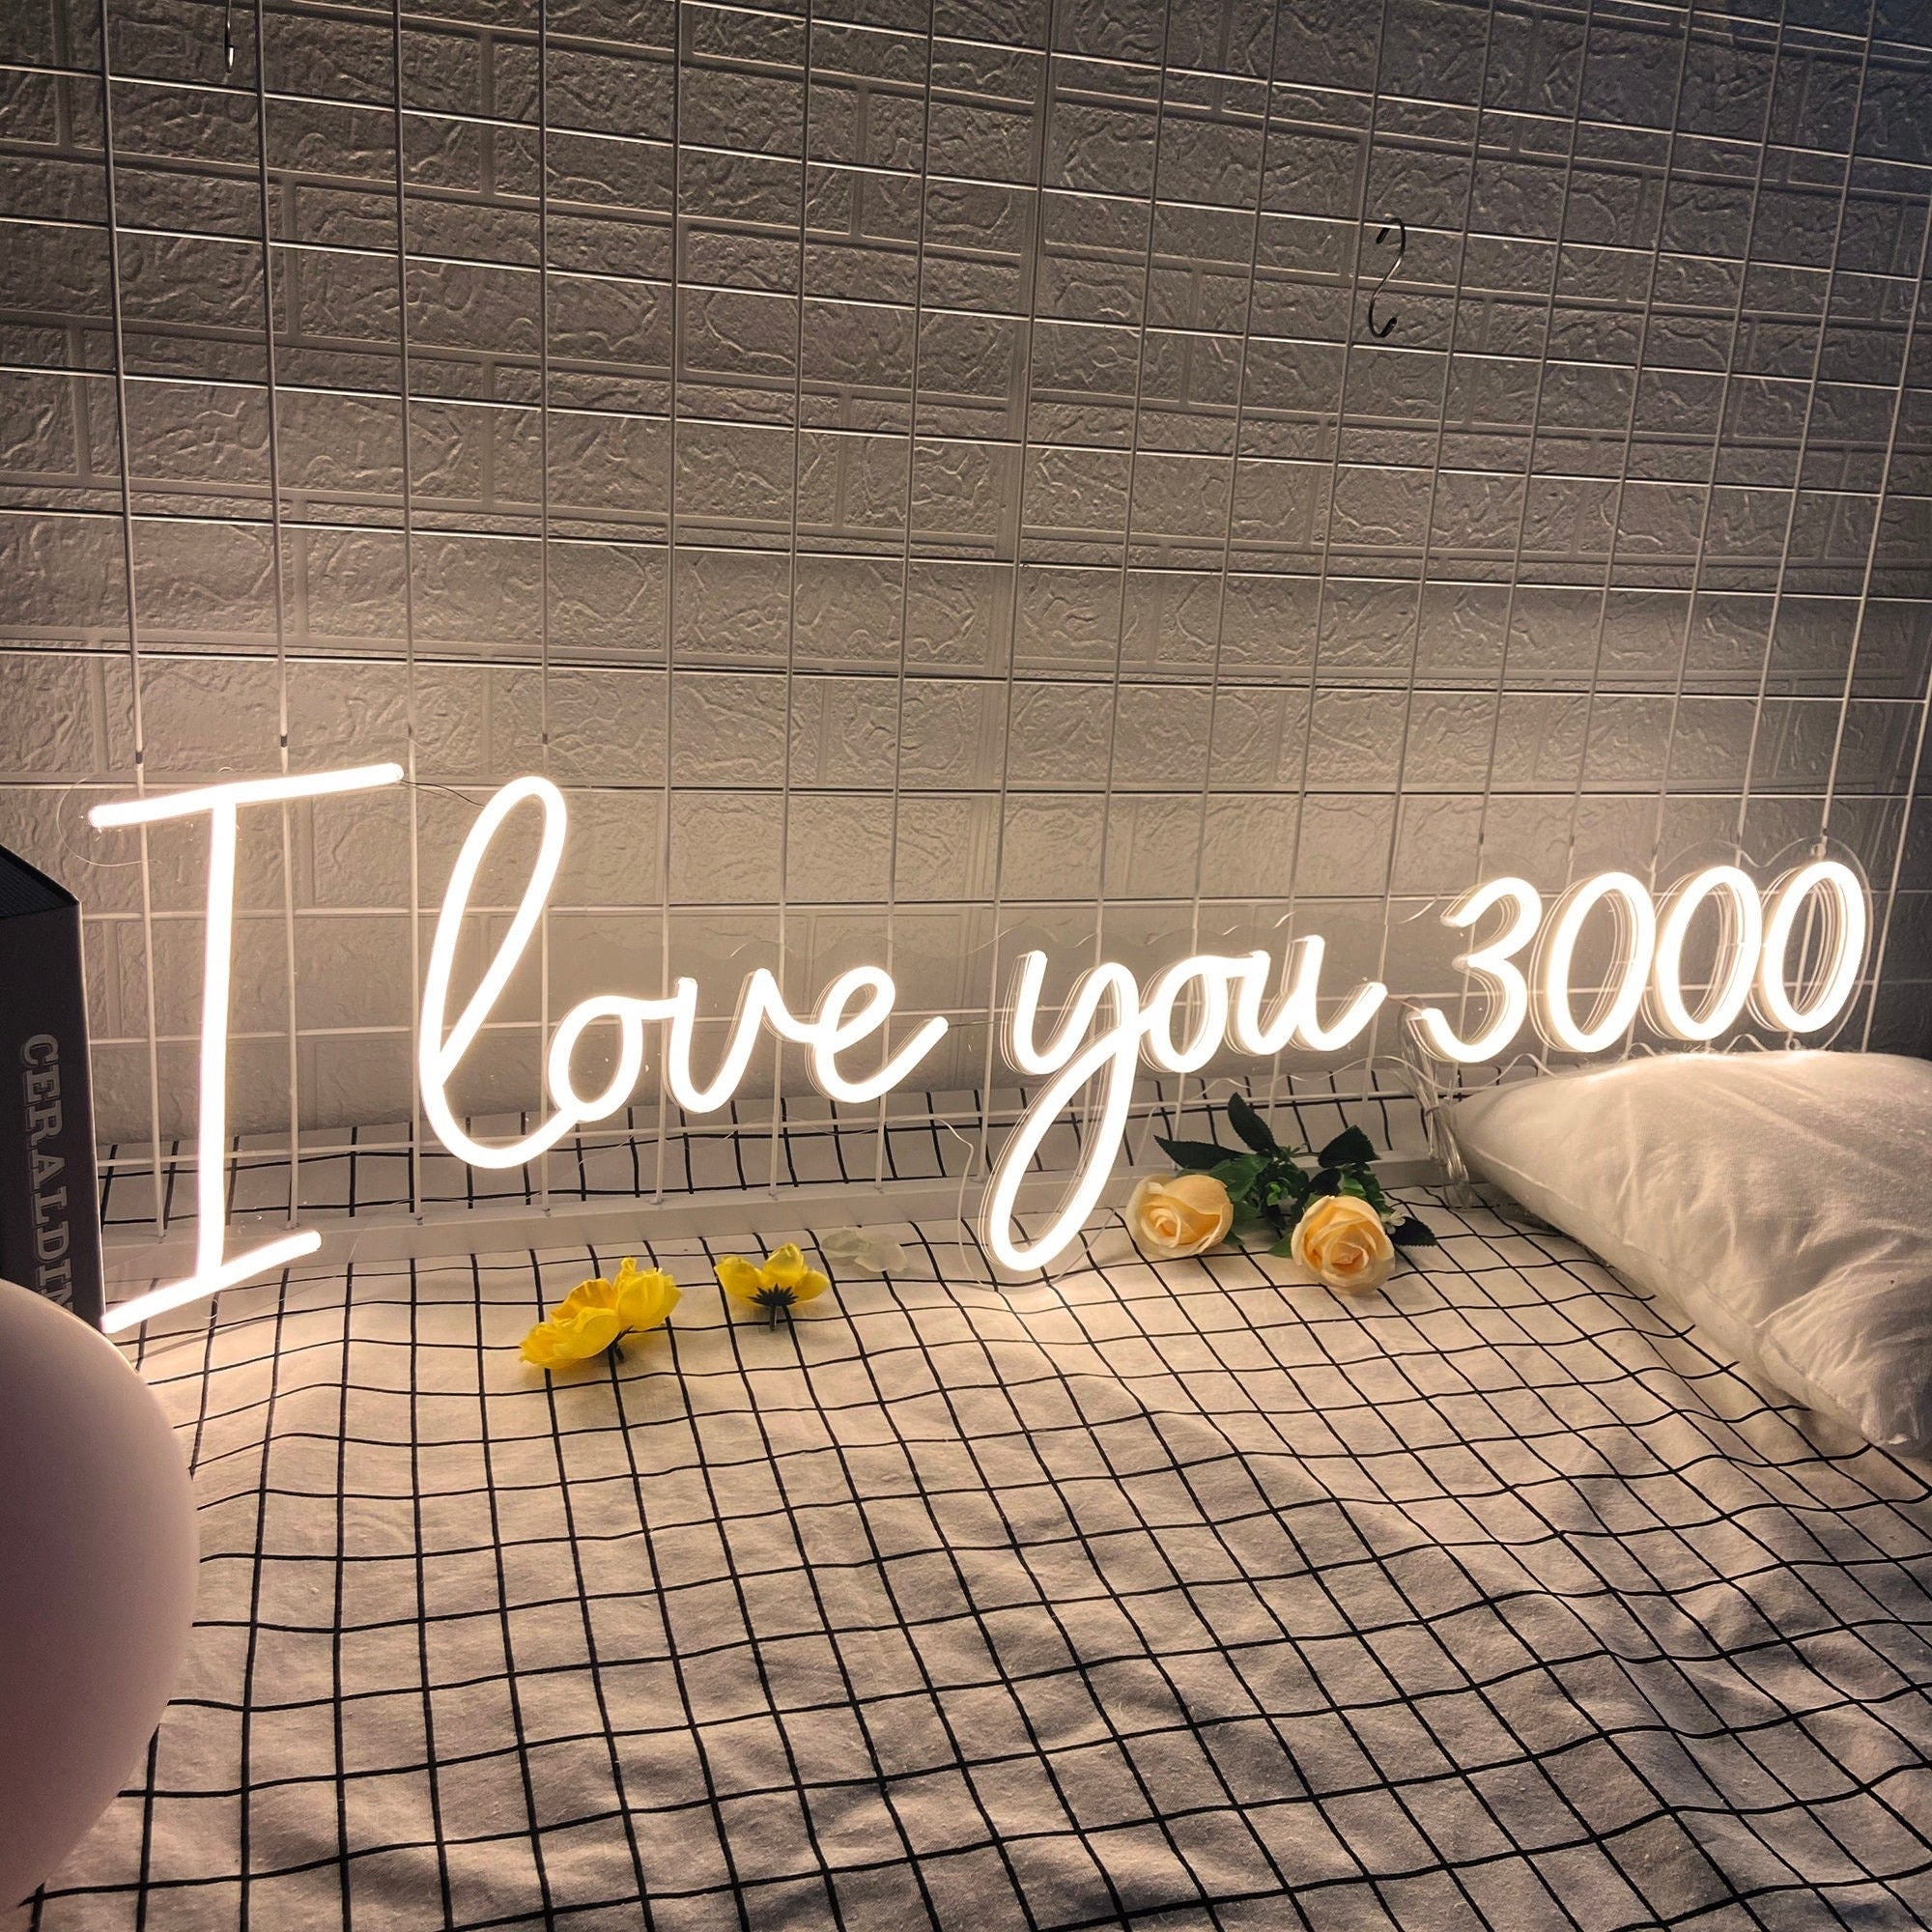 I love you 3000 neon sign